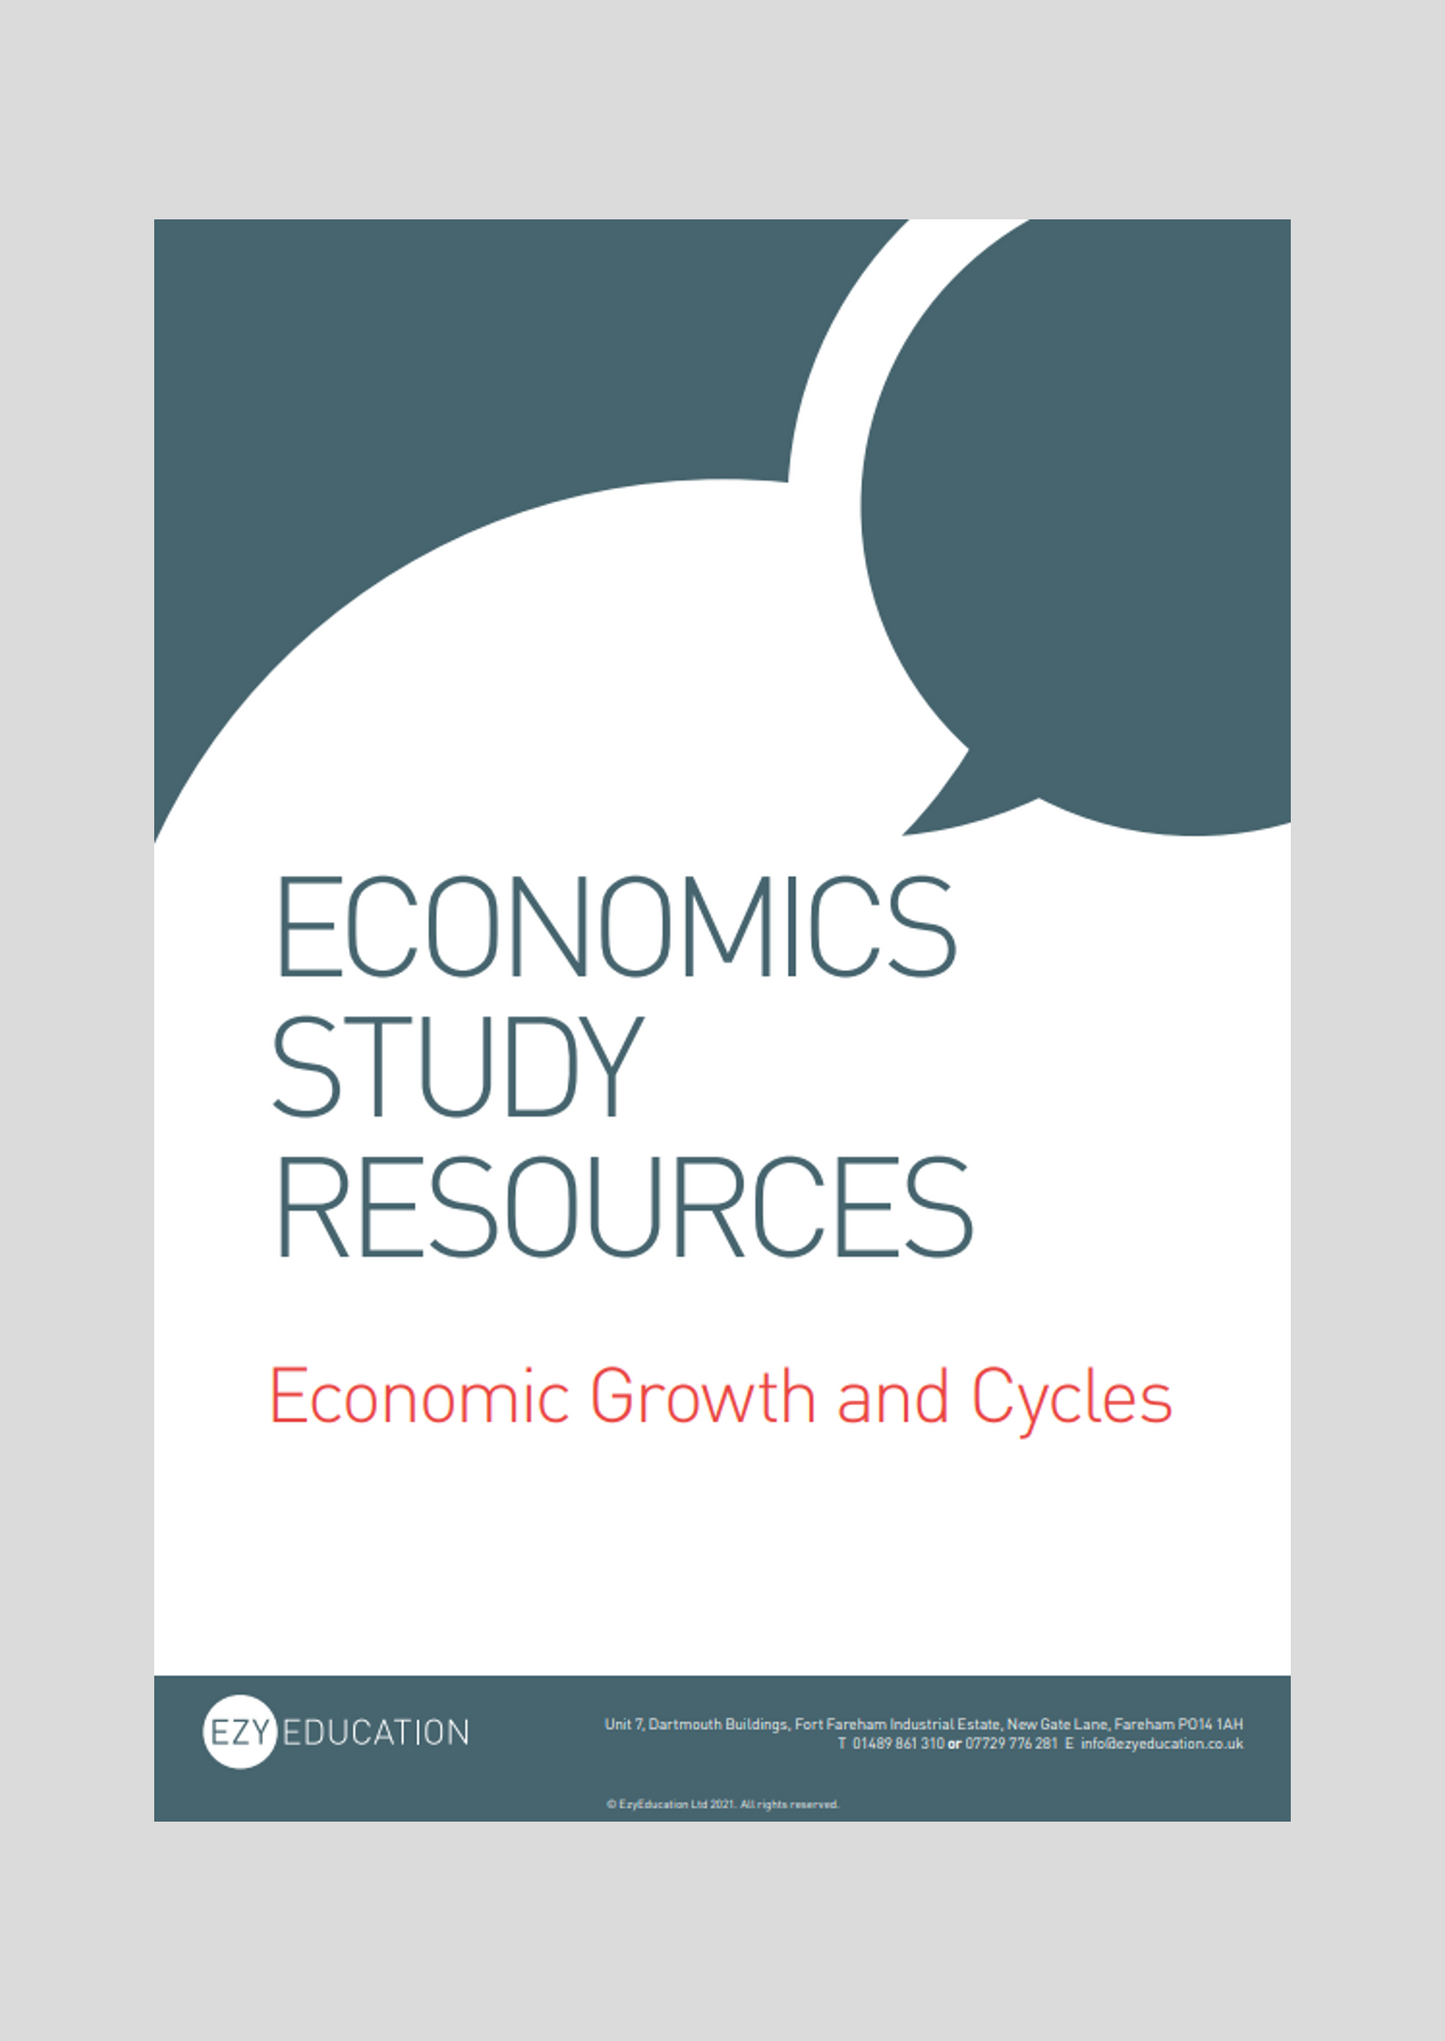 A-Level Macroeconomics Study Guide - Module 3: Economic Growth and Cycles